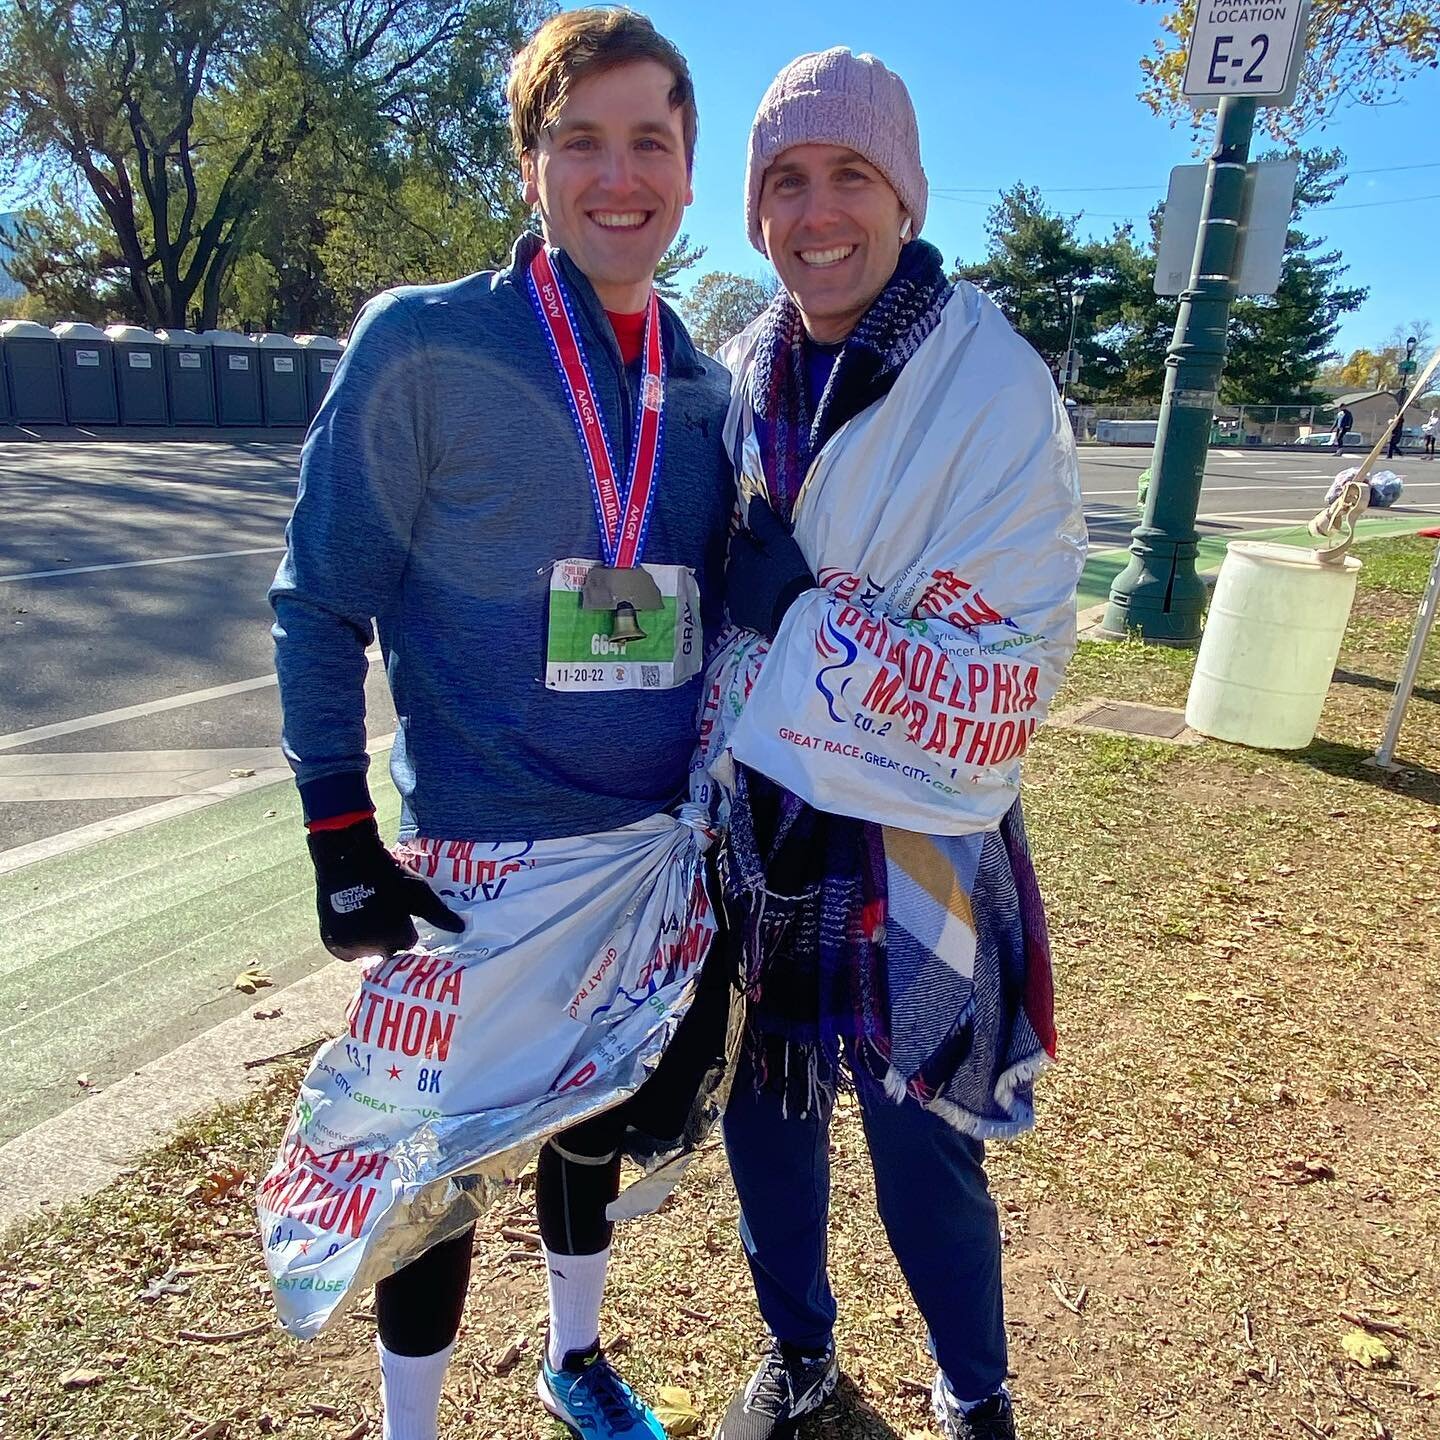 After 3 months of training I finished my 2nd marathon 🙌 couldn&rsquo;t have done it without my training partner @johncanreid, you&rsquo;re a beast

#running #philadelphia #phillymarathon #runner #marathon #race #training #cold #medal #runnersofinsta